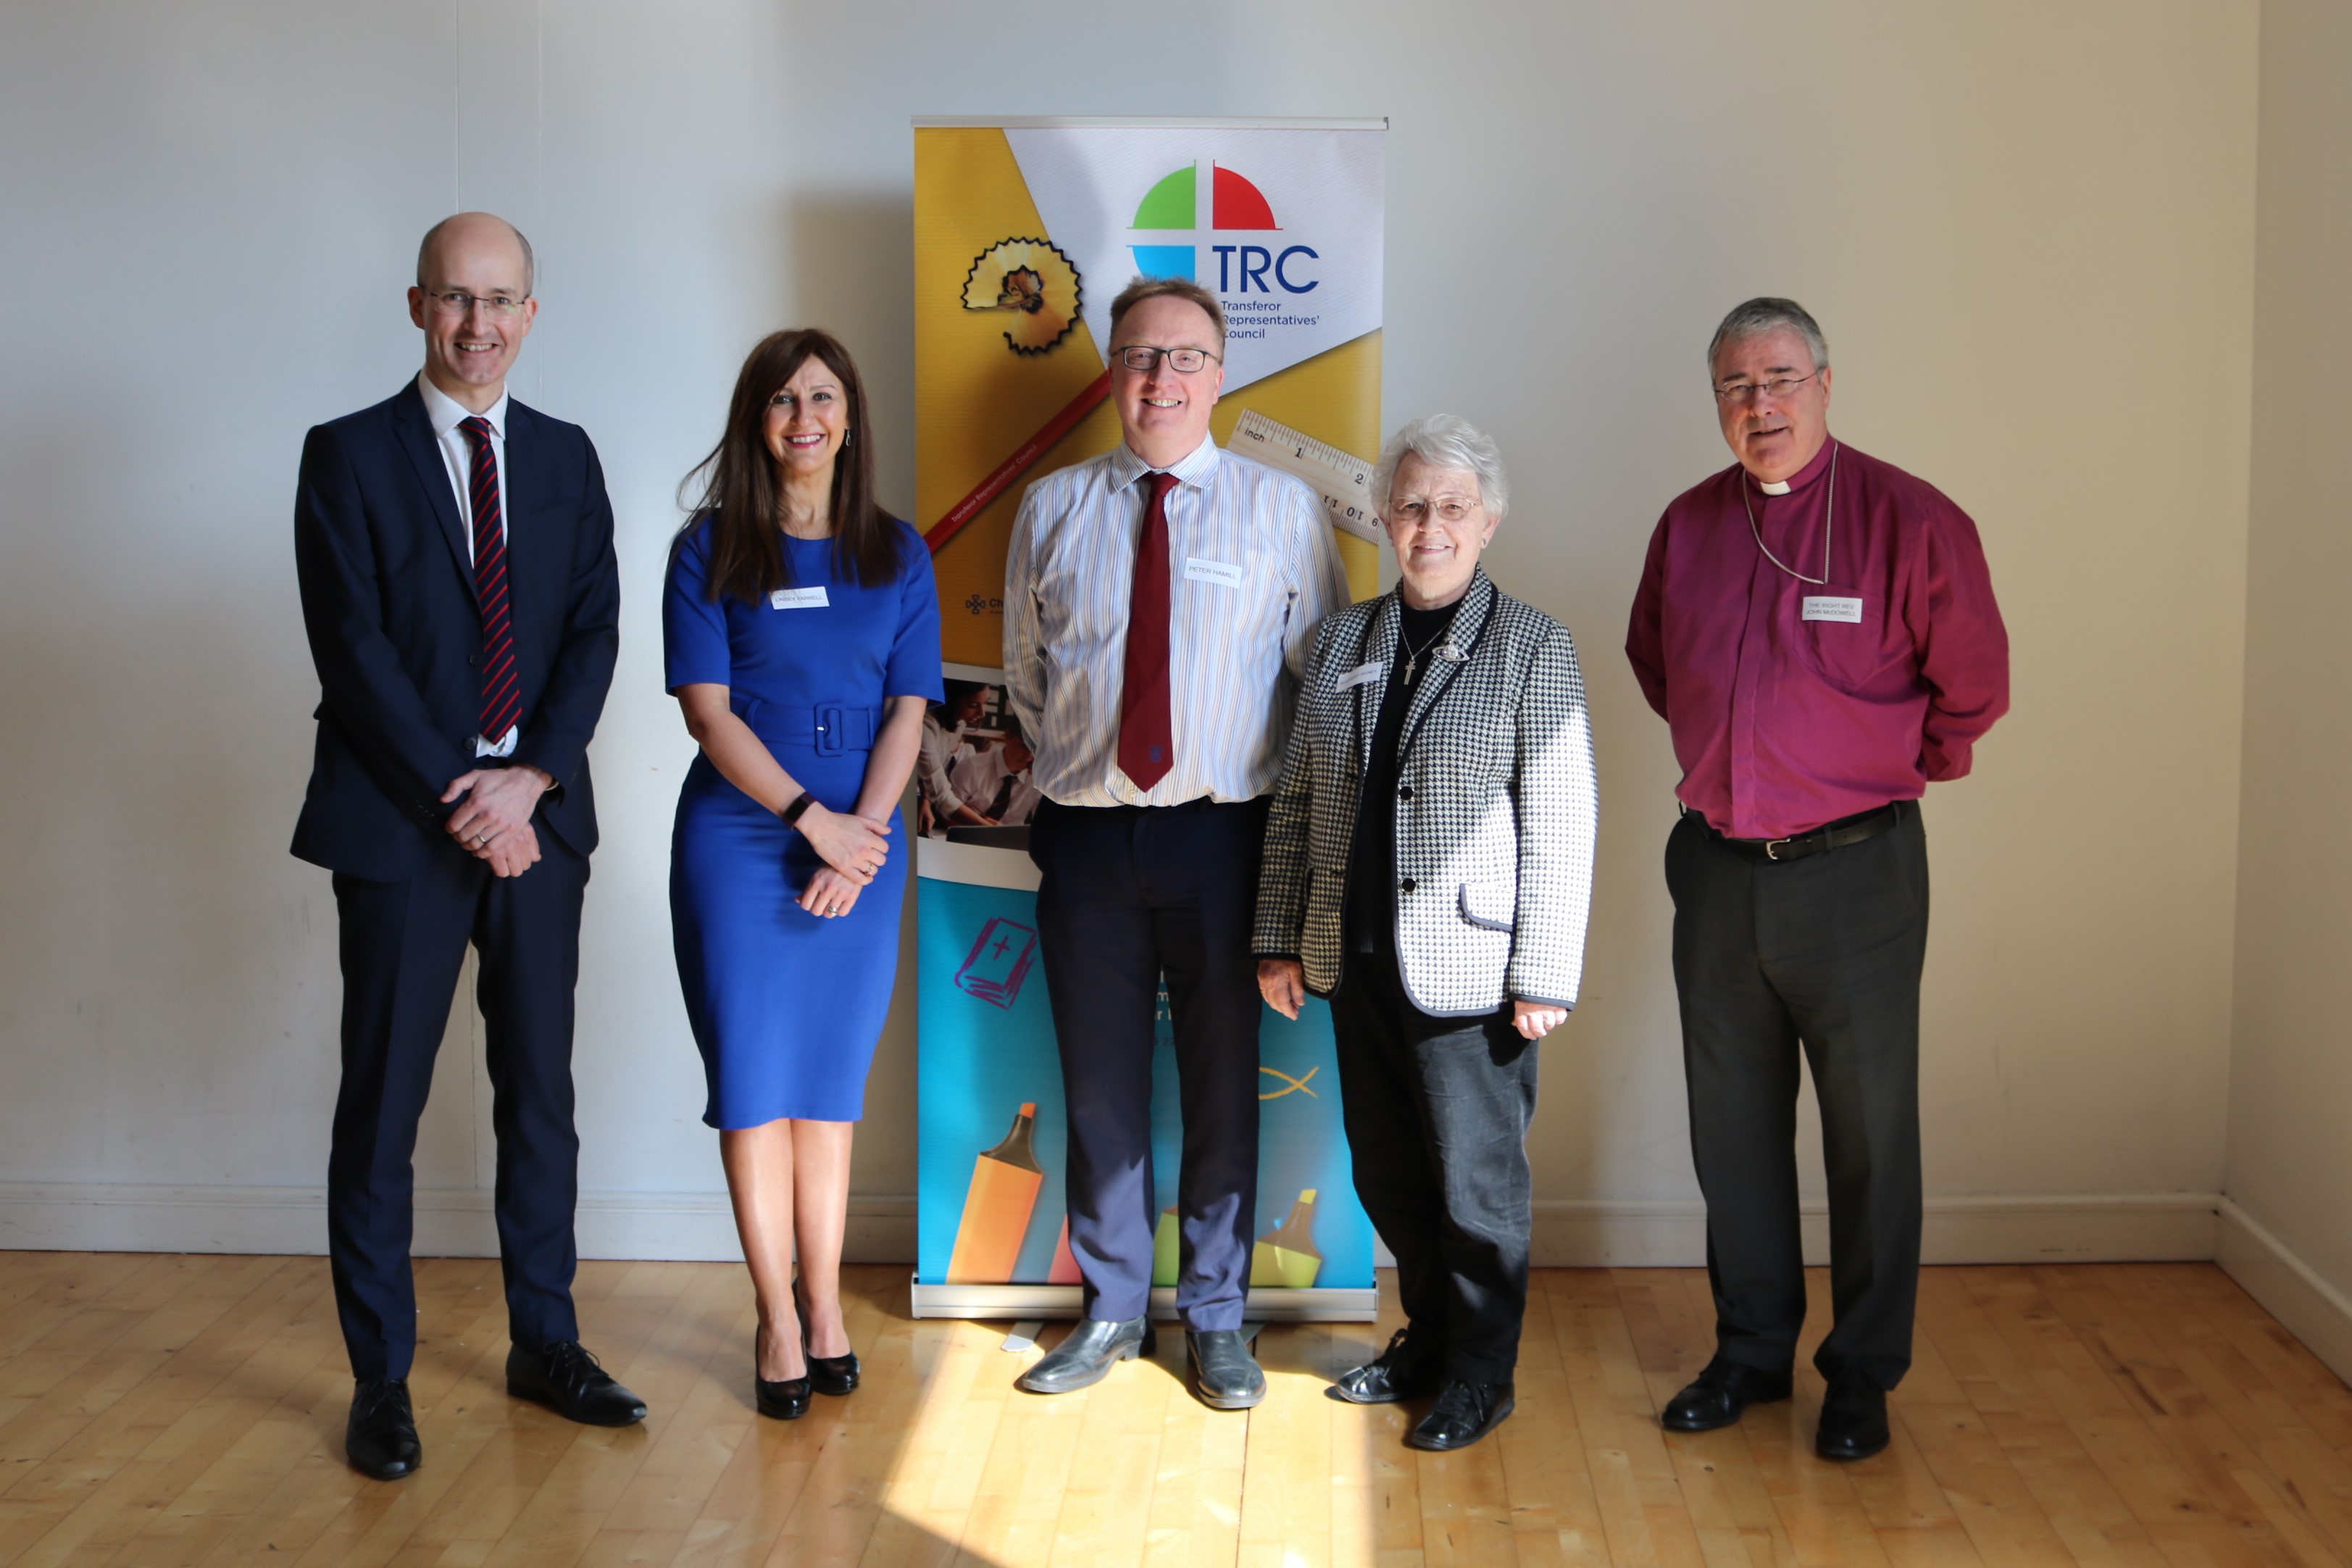 From left: Dr Noel Purdy, Stranmillis University College; Linsey Farrell, Department of Education; Dr Peter Hamill, TRC Secretary; Rosemary Rainey OBE, TRC Chair; and Archbishop John McDowell.